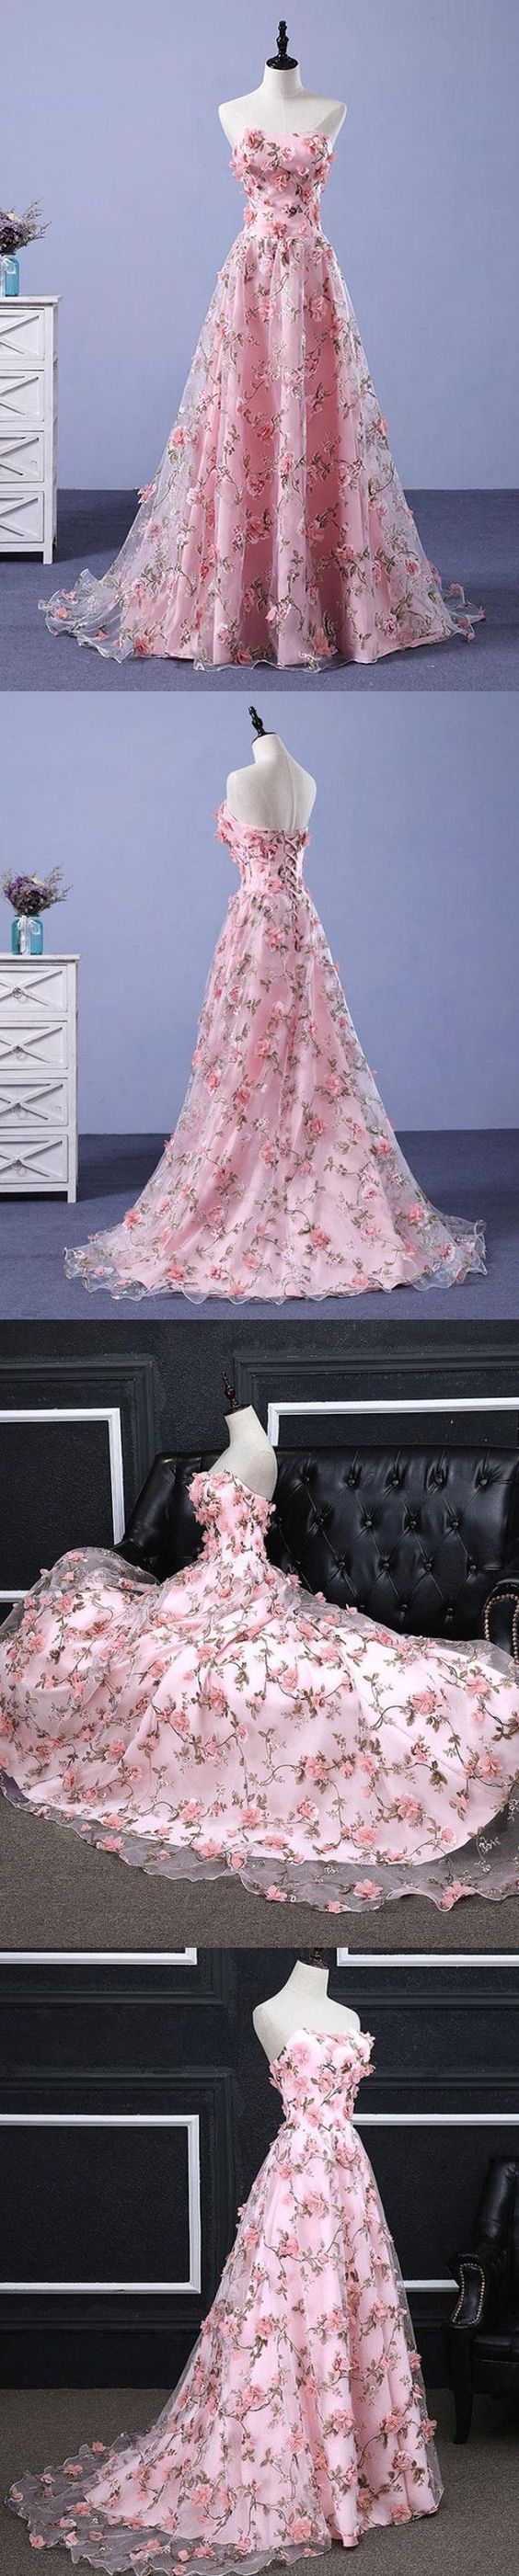 Pink Prom Dresses, A-line Sweetheart,sweep Train ,floral Print ,long Lace Prom Dress ,sexy Prom Dress, Long Evening Dress